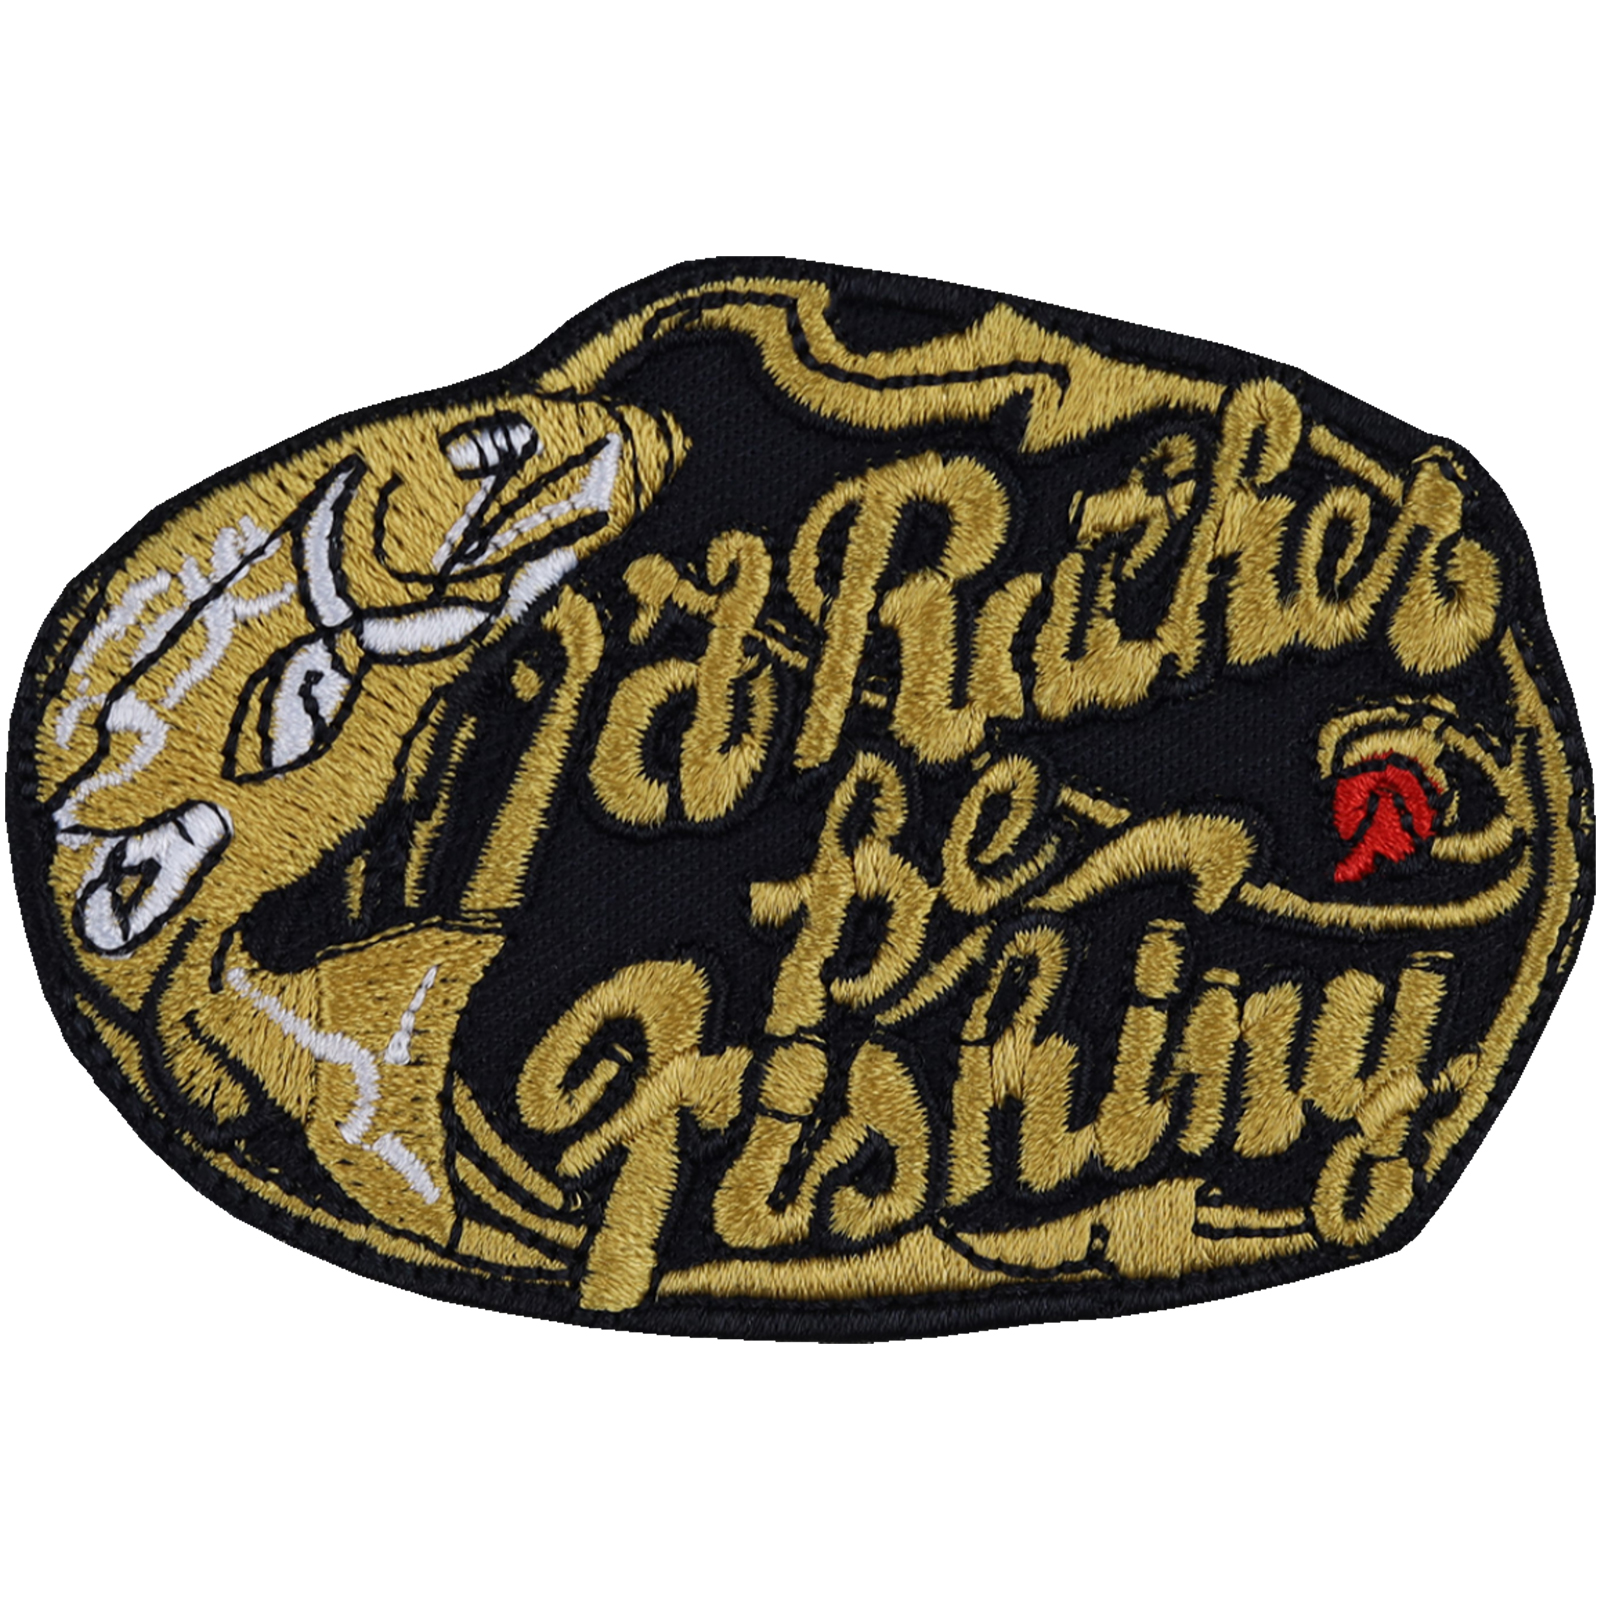 I'd rather be fishing - Patch